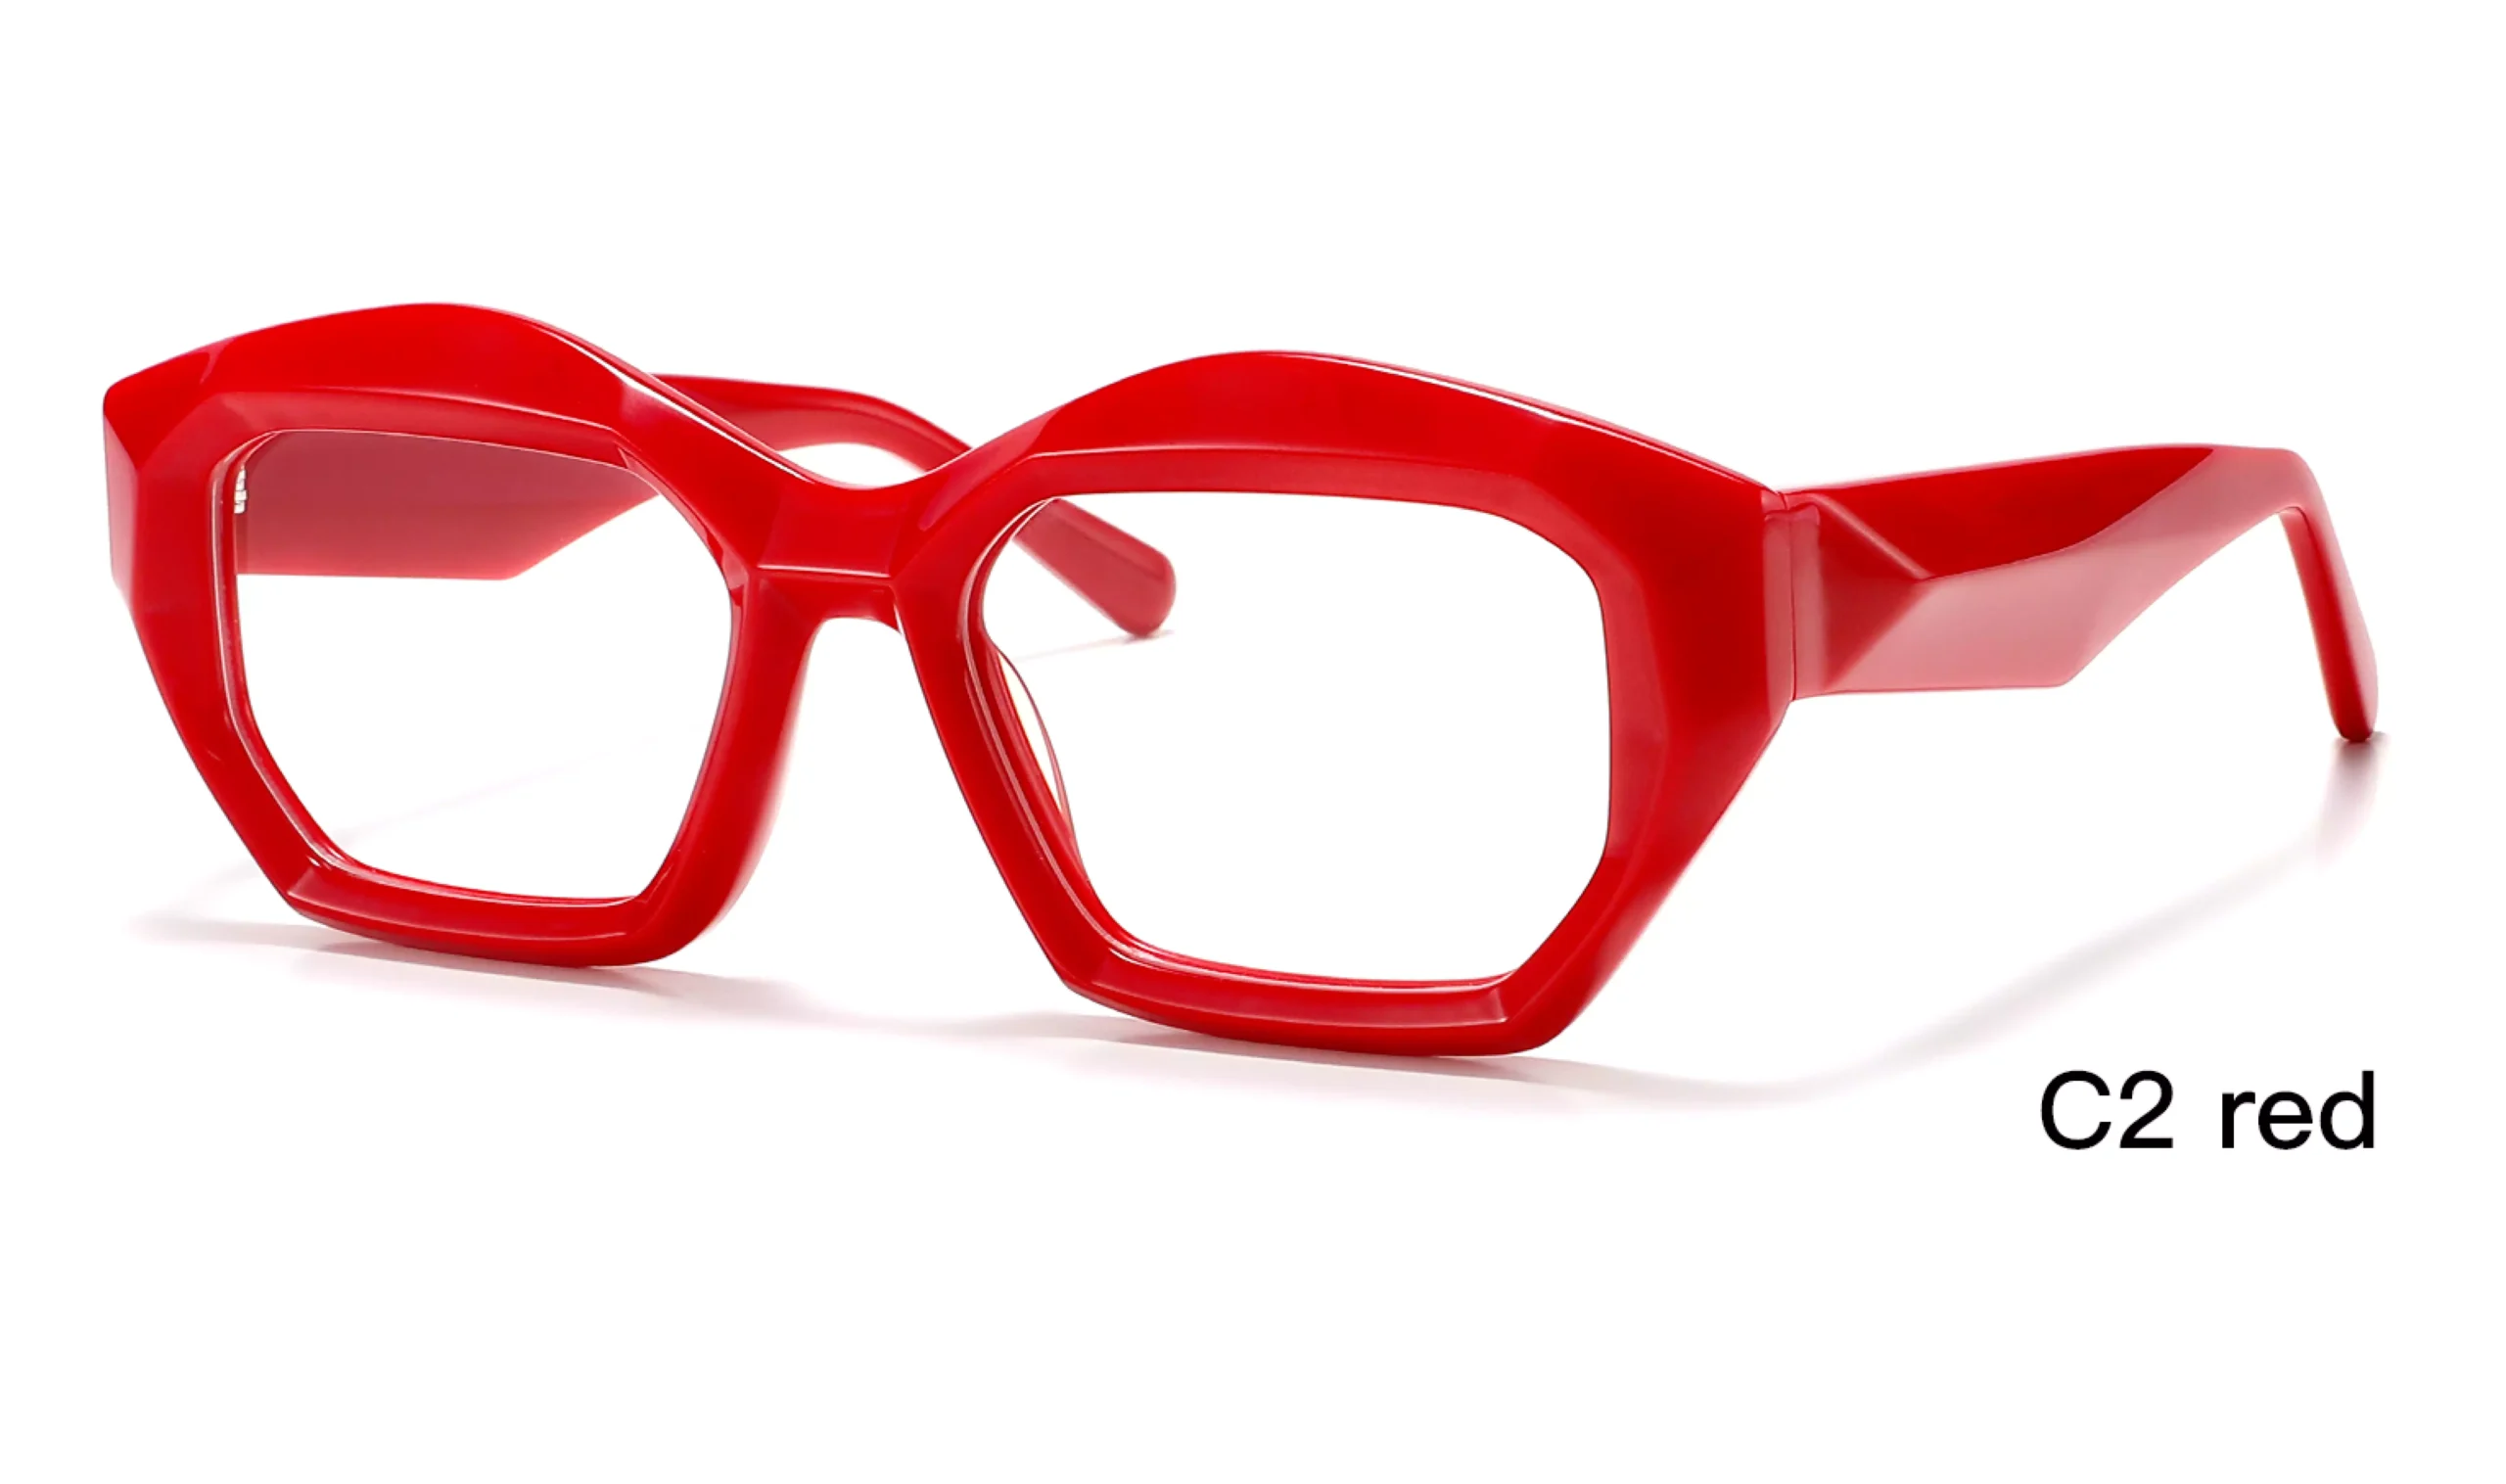 wholesale red glasses frames, replica glasses, thick rimmed, acetate, for opticians, made in China